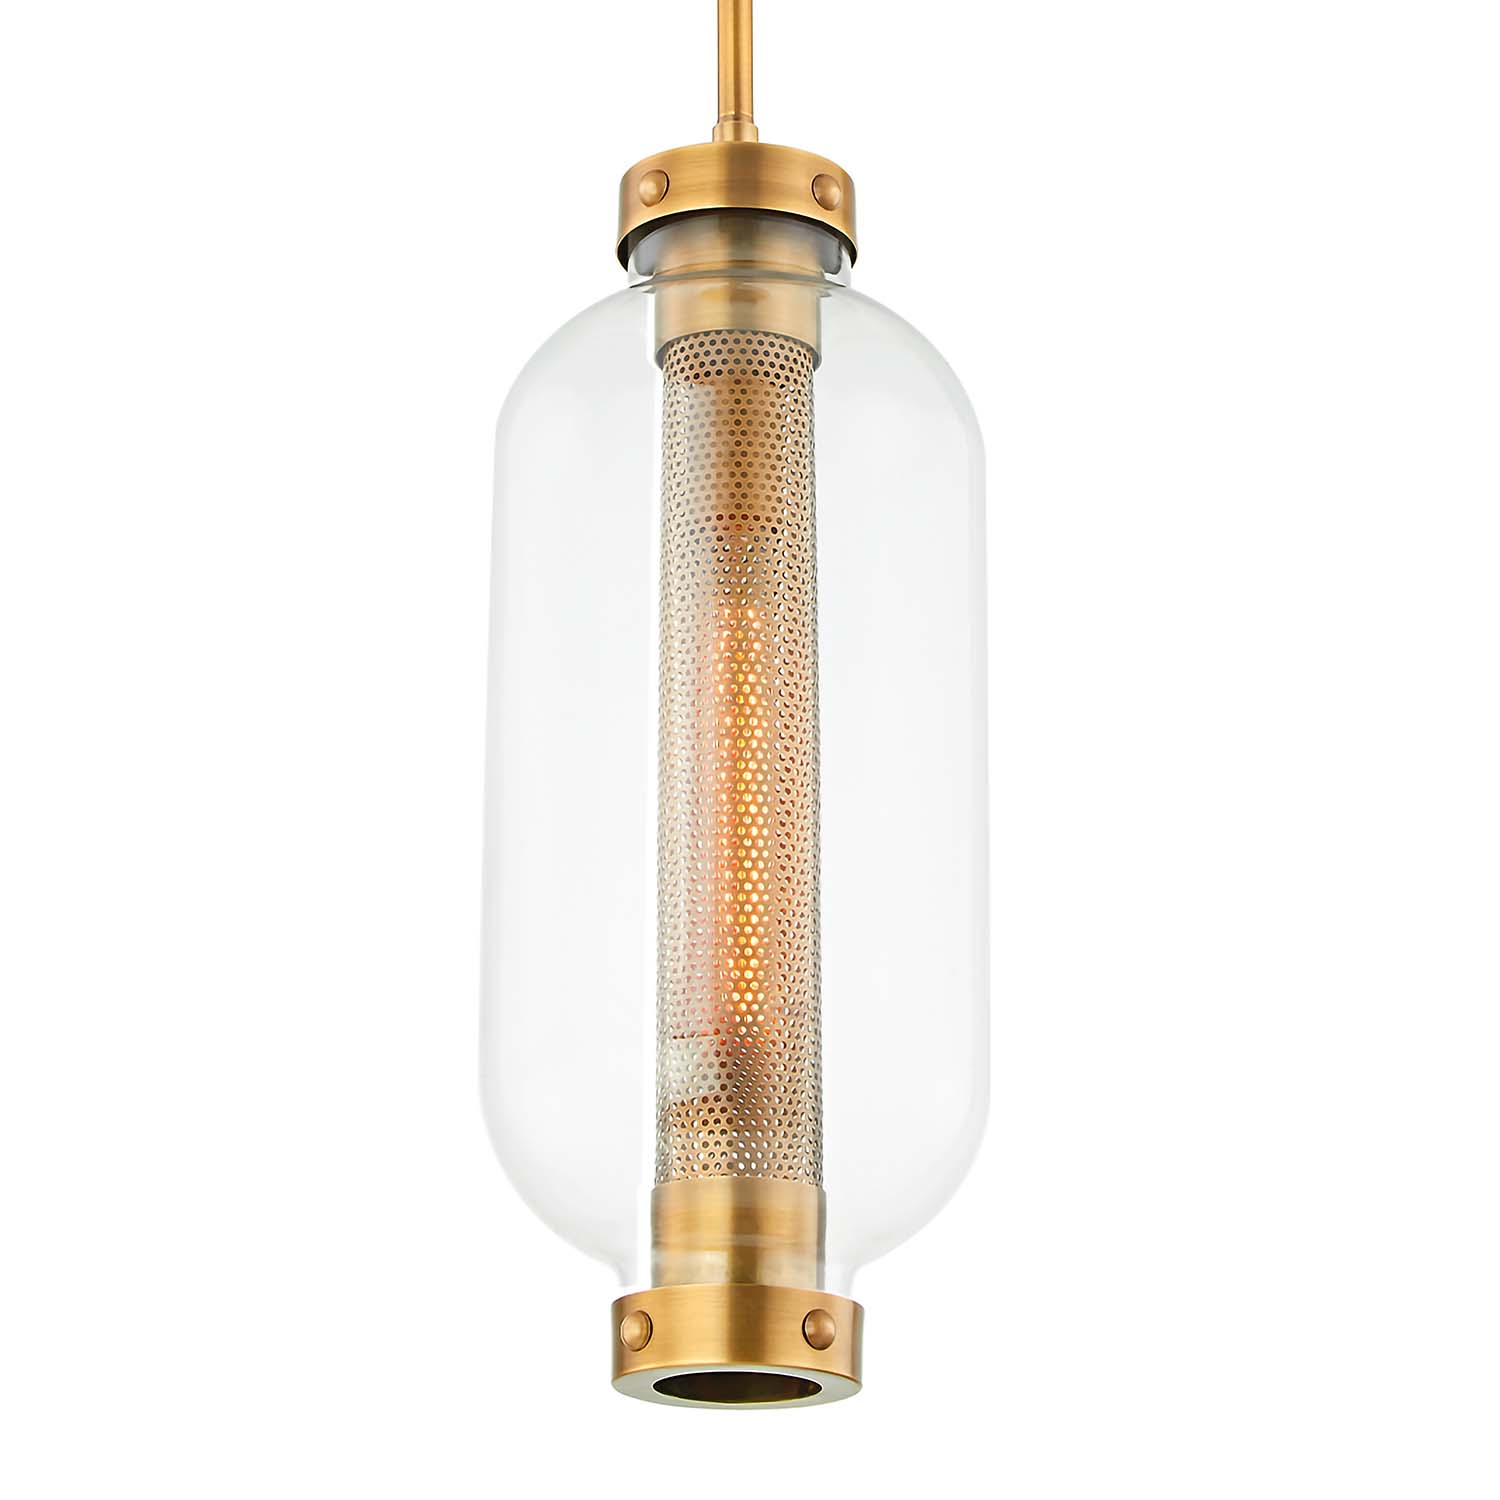 ATWATER - Vintage brass and glass pendant light